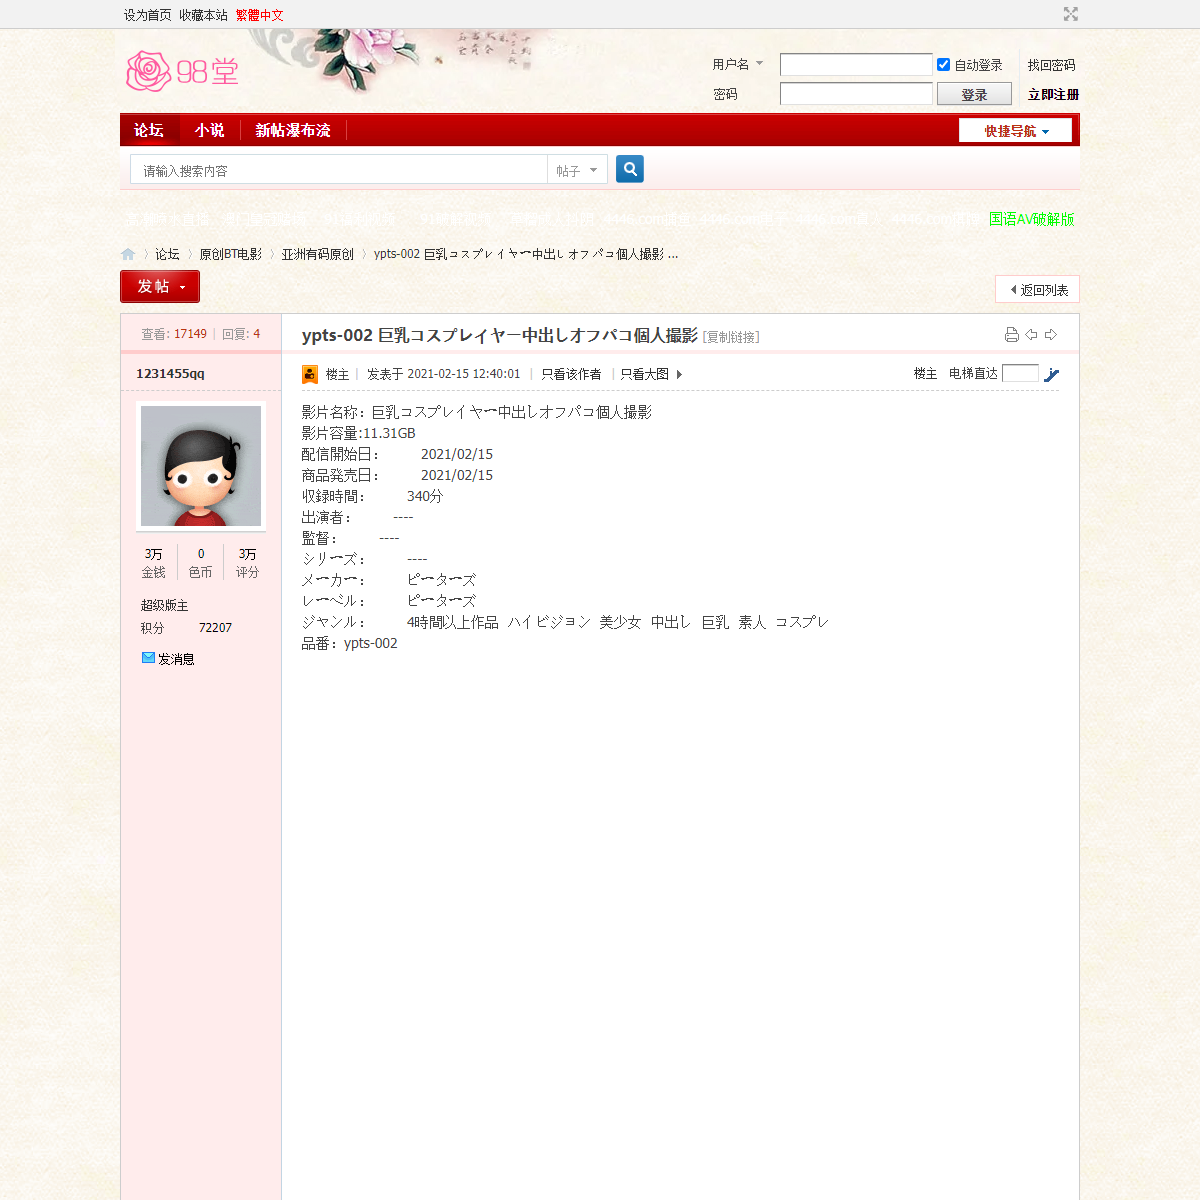 A complete backup of https://sehuatang.net/thread-480626-1-1.html